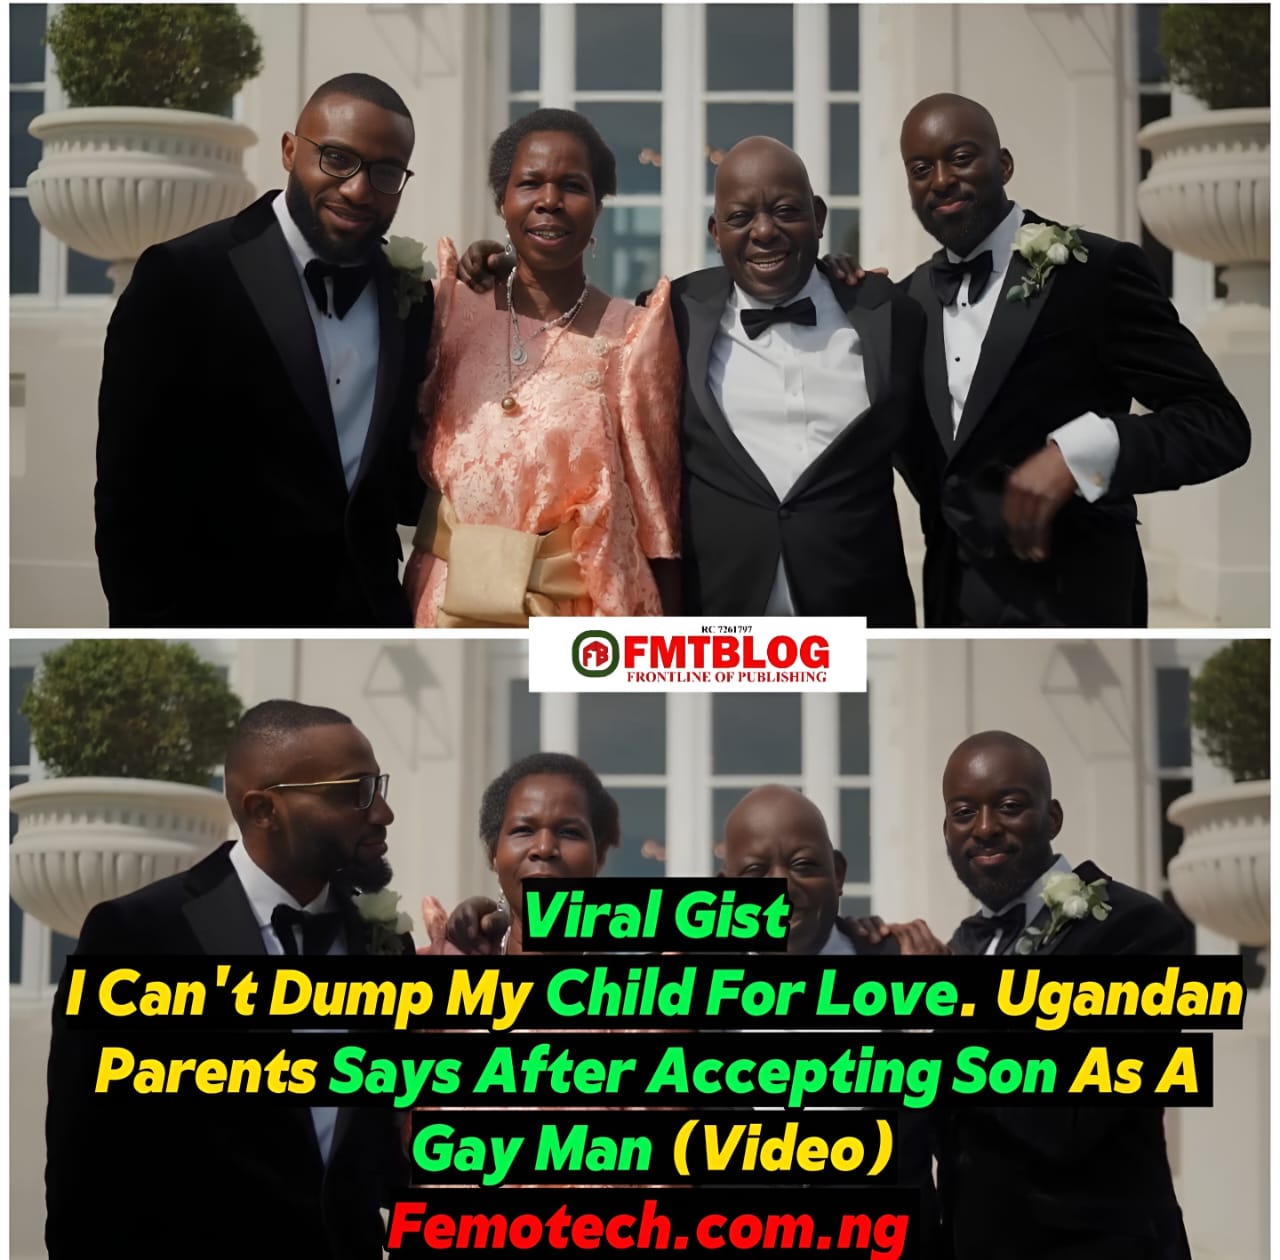 I Can’t Dump My Child For Love. Ugandan Parents Says After Accepting Son As A Gay Man (Video)